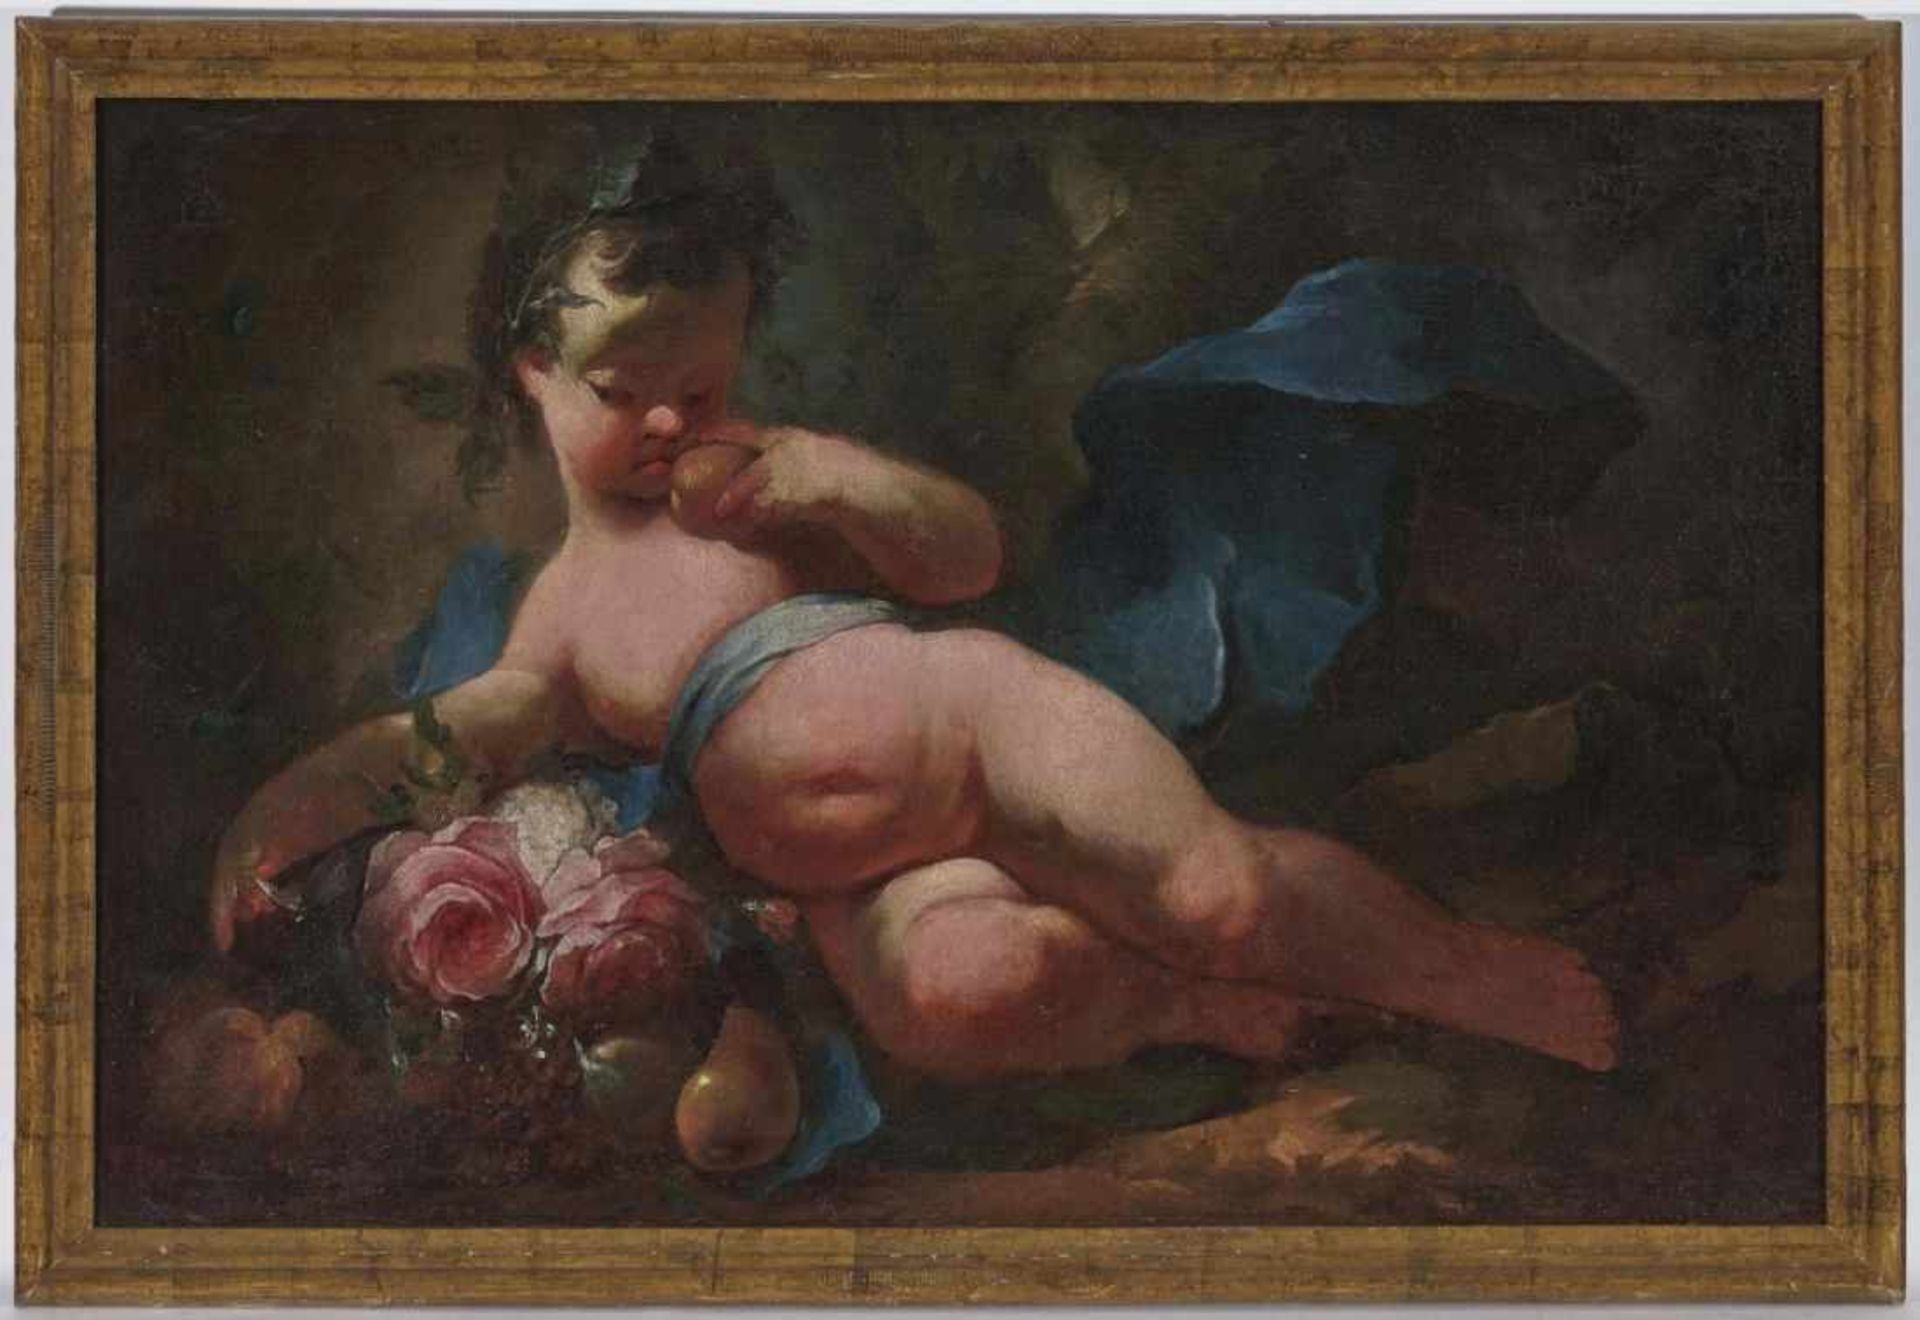 South German or Austrian SchoolPutto with Flowers and Fruits Oil on canvas. 74 x 112 cm. Relined. - Bild 2 aus 2